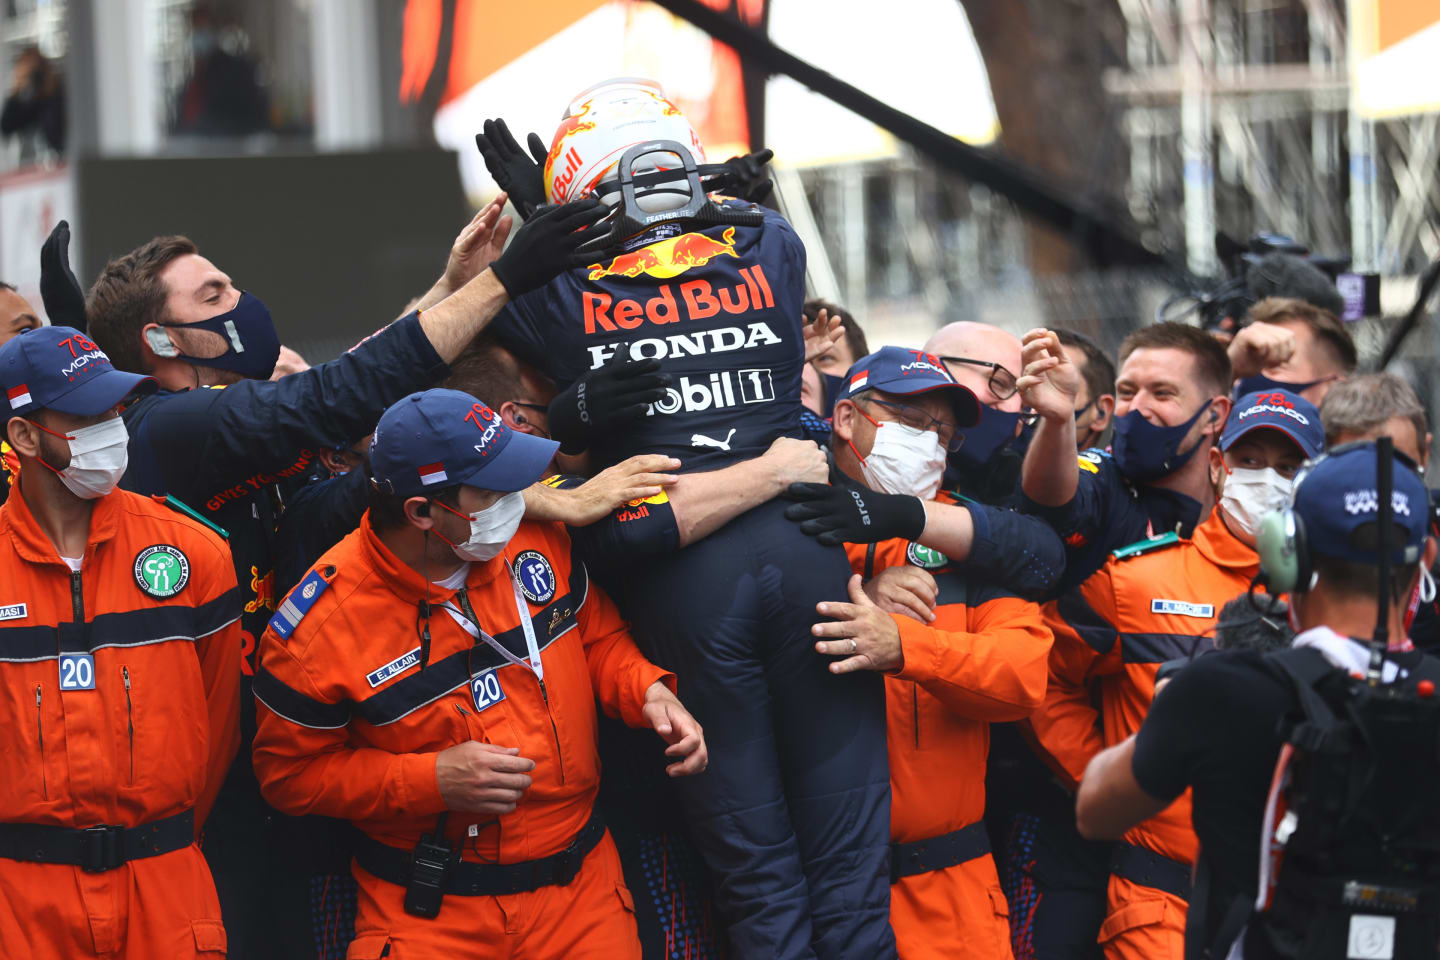 MONTE-CARLO, MONACO - MAY 23: Race winner Max Verstappen of Netherlands and Red Bull Racing celebrates with his team in parc ferme during the F1 Grand Prix of Monaco at Circuit de Monaco on May 23, 2021 in Monte-Carlo, Monaco. (Photo by Bryn Lennon/Getty Images)